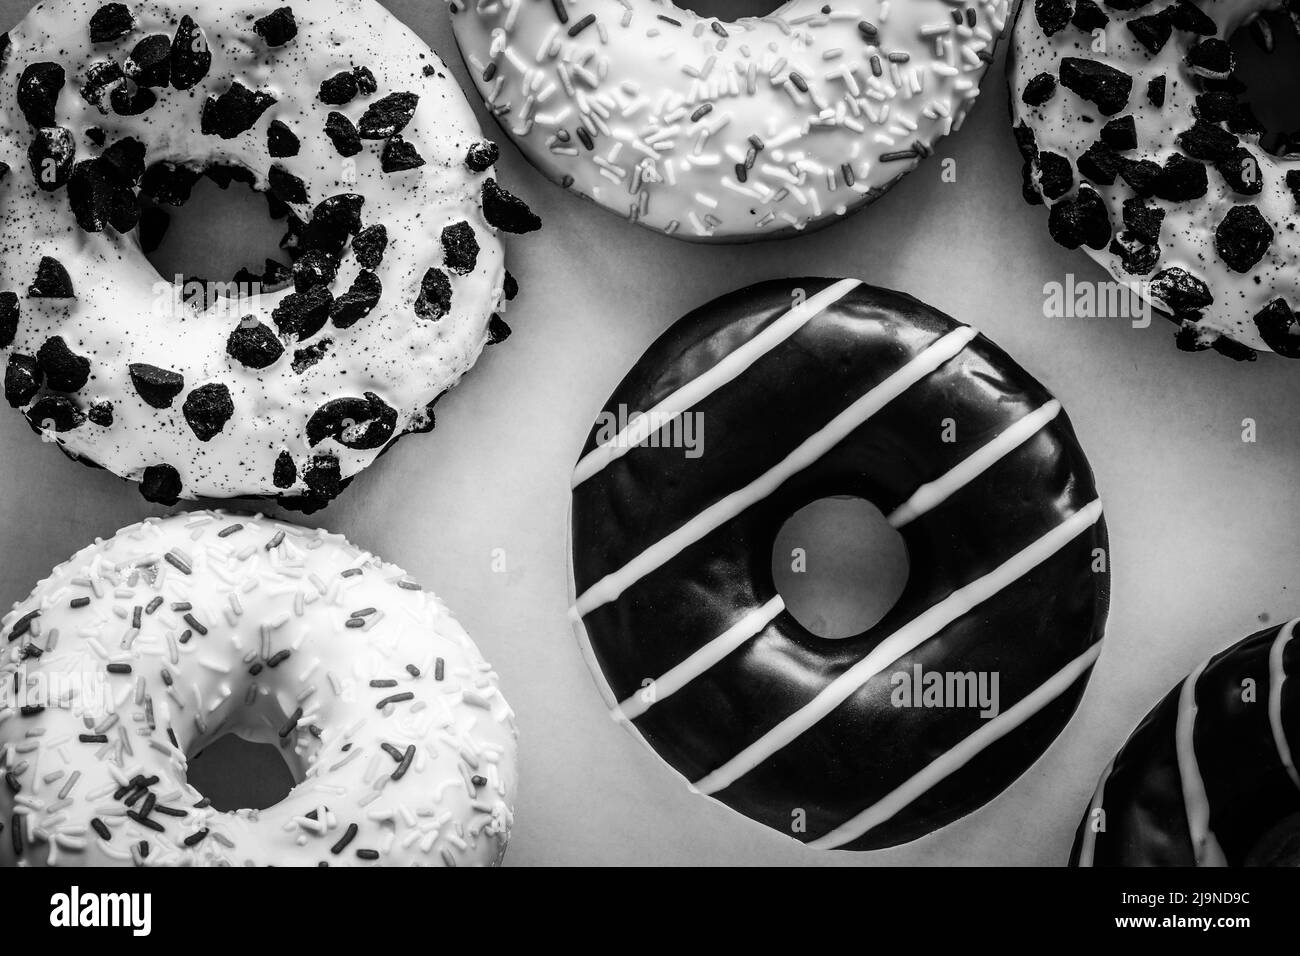 Flat lay image of donut with chocolate glaze with stripes amids other different donuts - black and white image Stock Photo